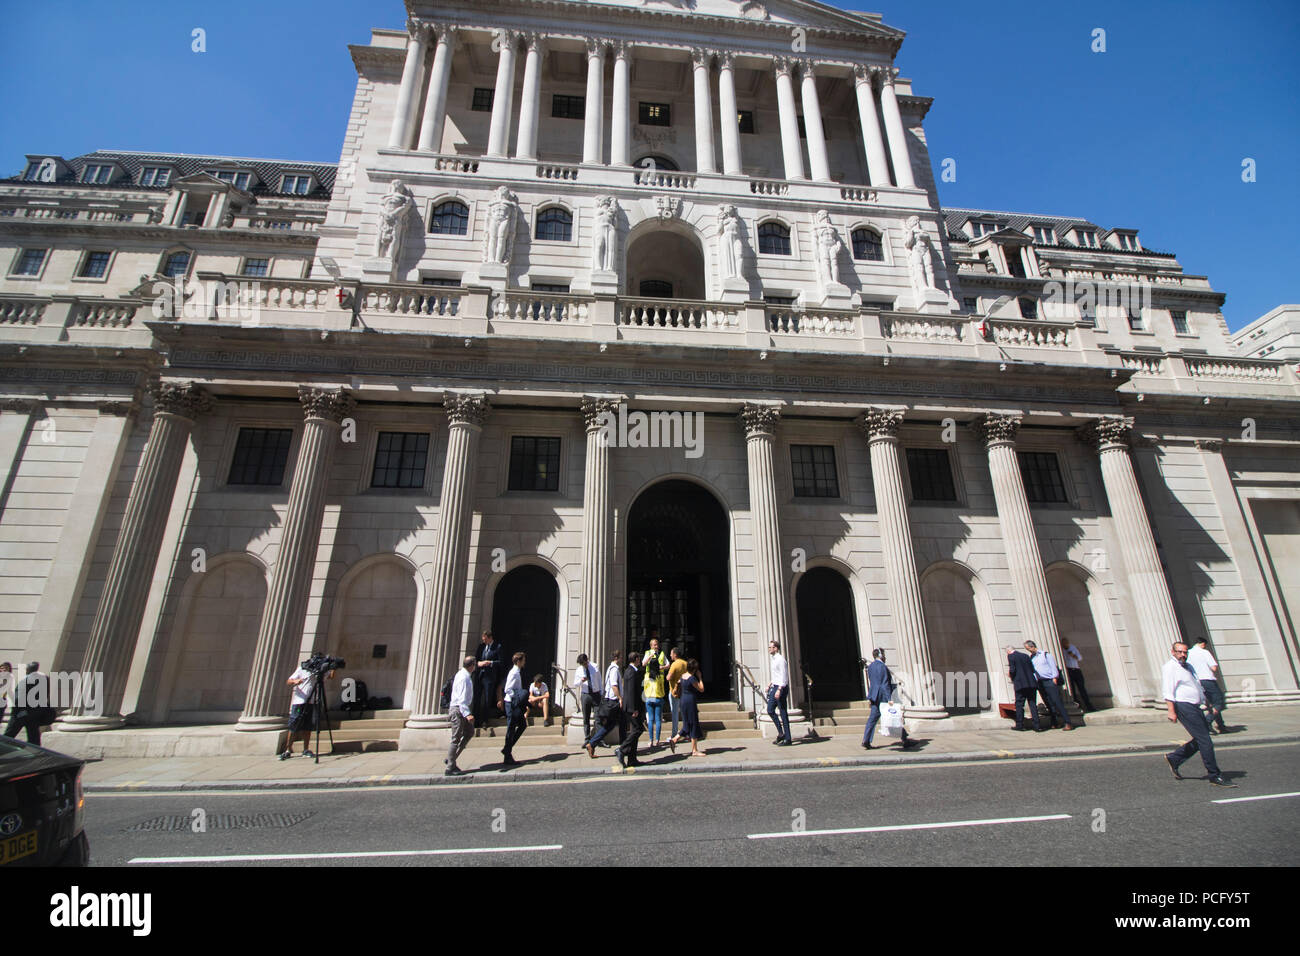 London UK. 2nd August 2018. The Bank of England  Monetary Policy Committee (MPC) has announced an interest rate rise by a quarter of a percentage point, from 0.5% to 0.75%  the highest level in 10 years since March 2009 and the interest rate  increase will hit nearly four million mortgage buyers Credit: amer ghazzal/Alamy Live News Stock Photo